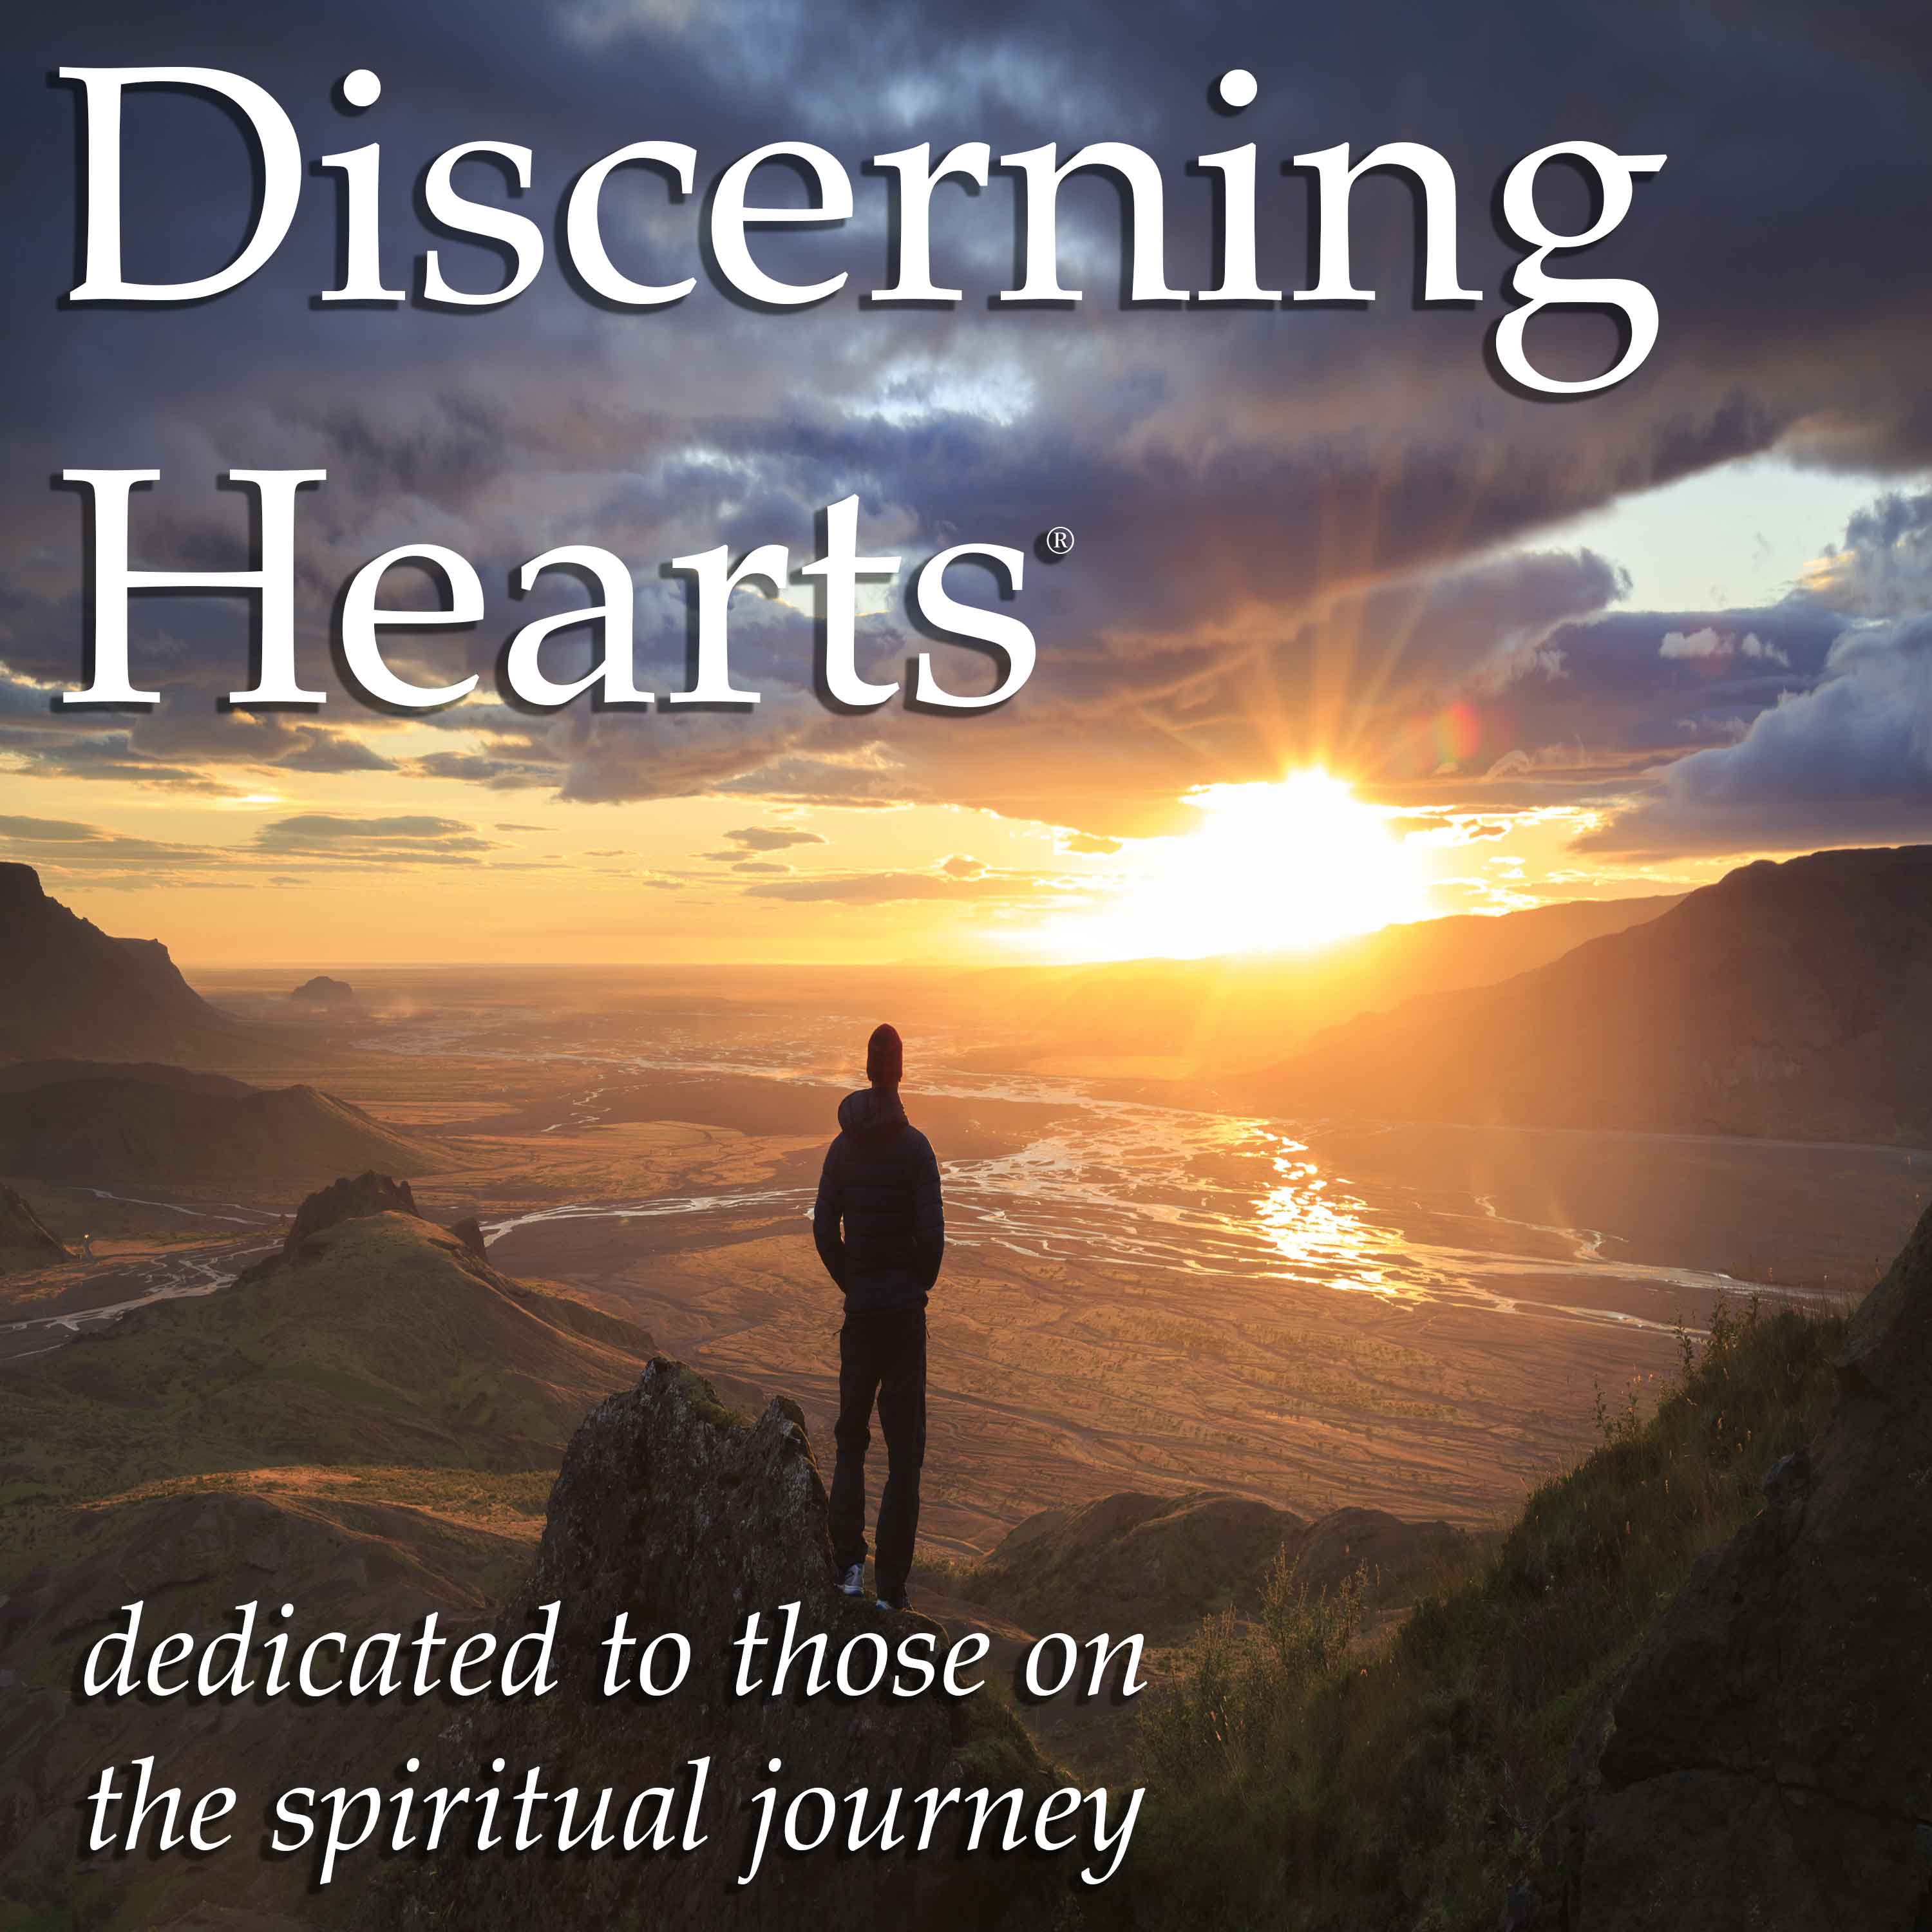 5th Thursday of Lent  A Time of Lectio Divina for the Discerning Heart Podcast - burst 2